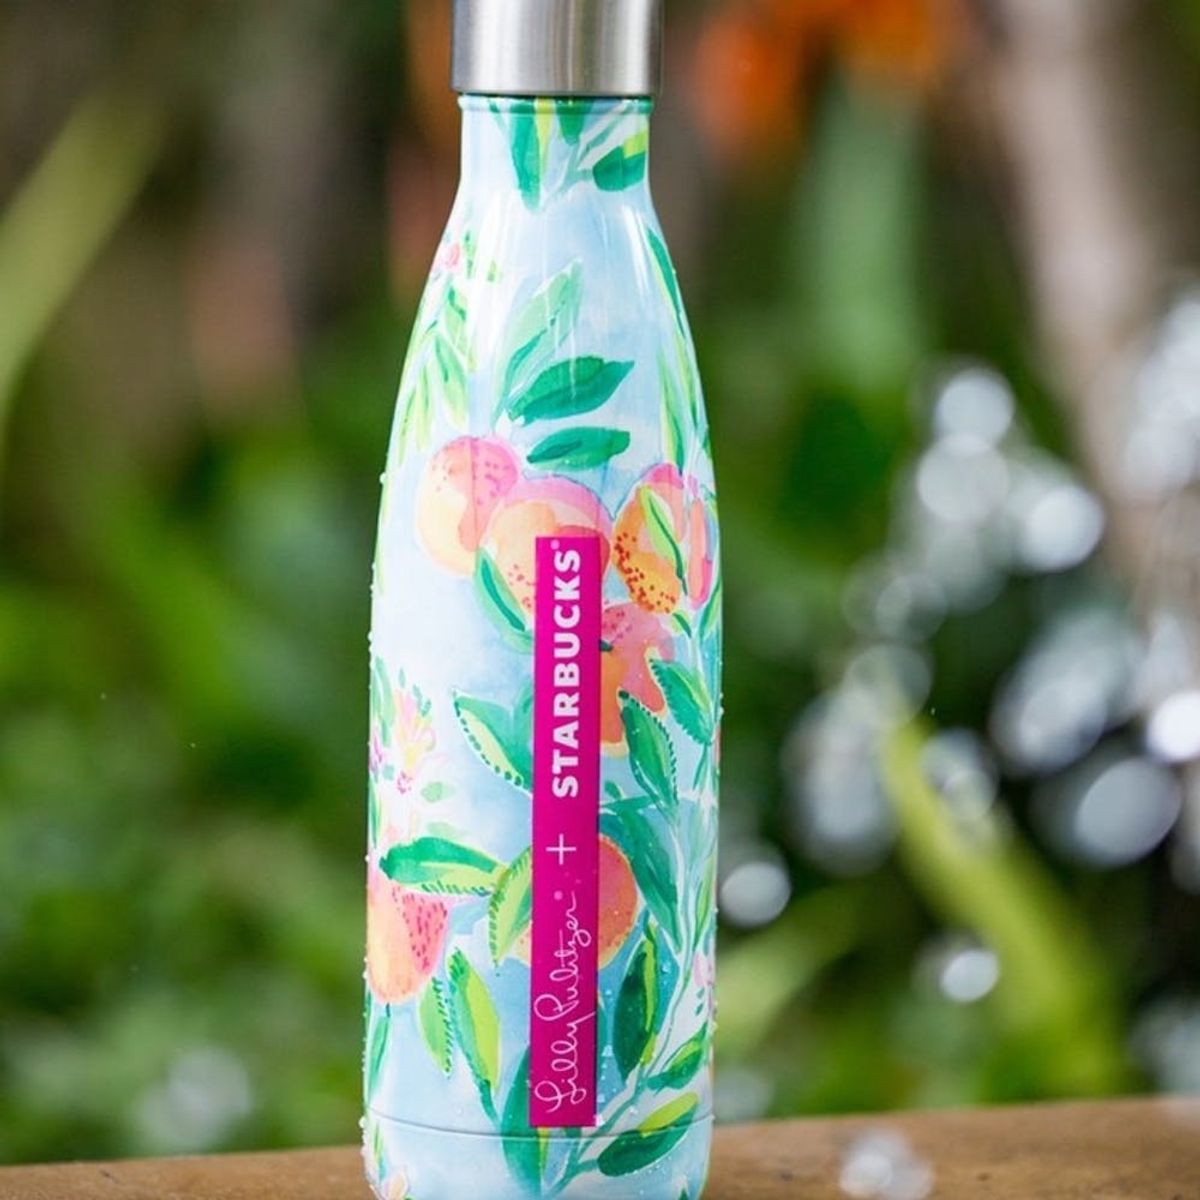 You Won’t Believe How Much These S’Well Lilly Pulitzer x Starbucks Water Bottles Are Going for on eBay